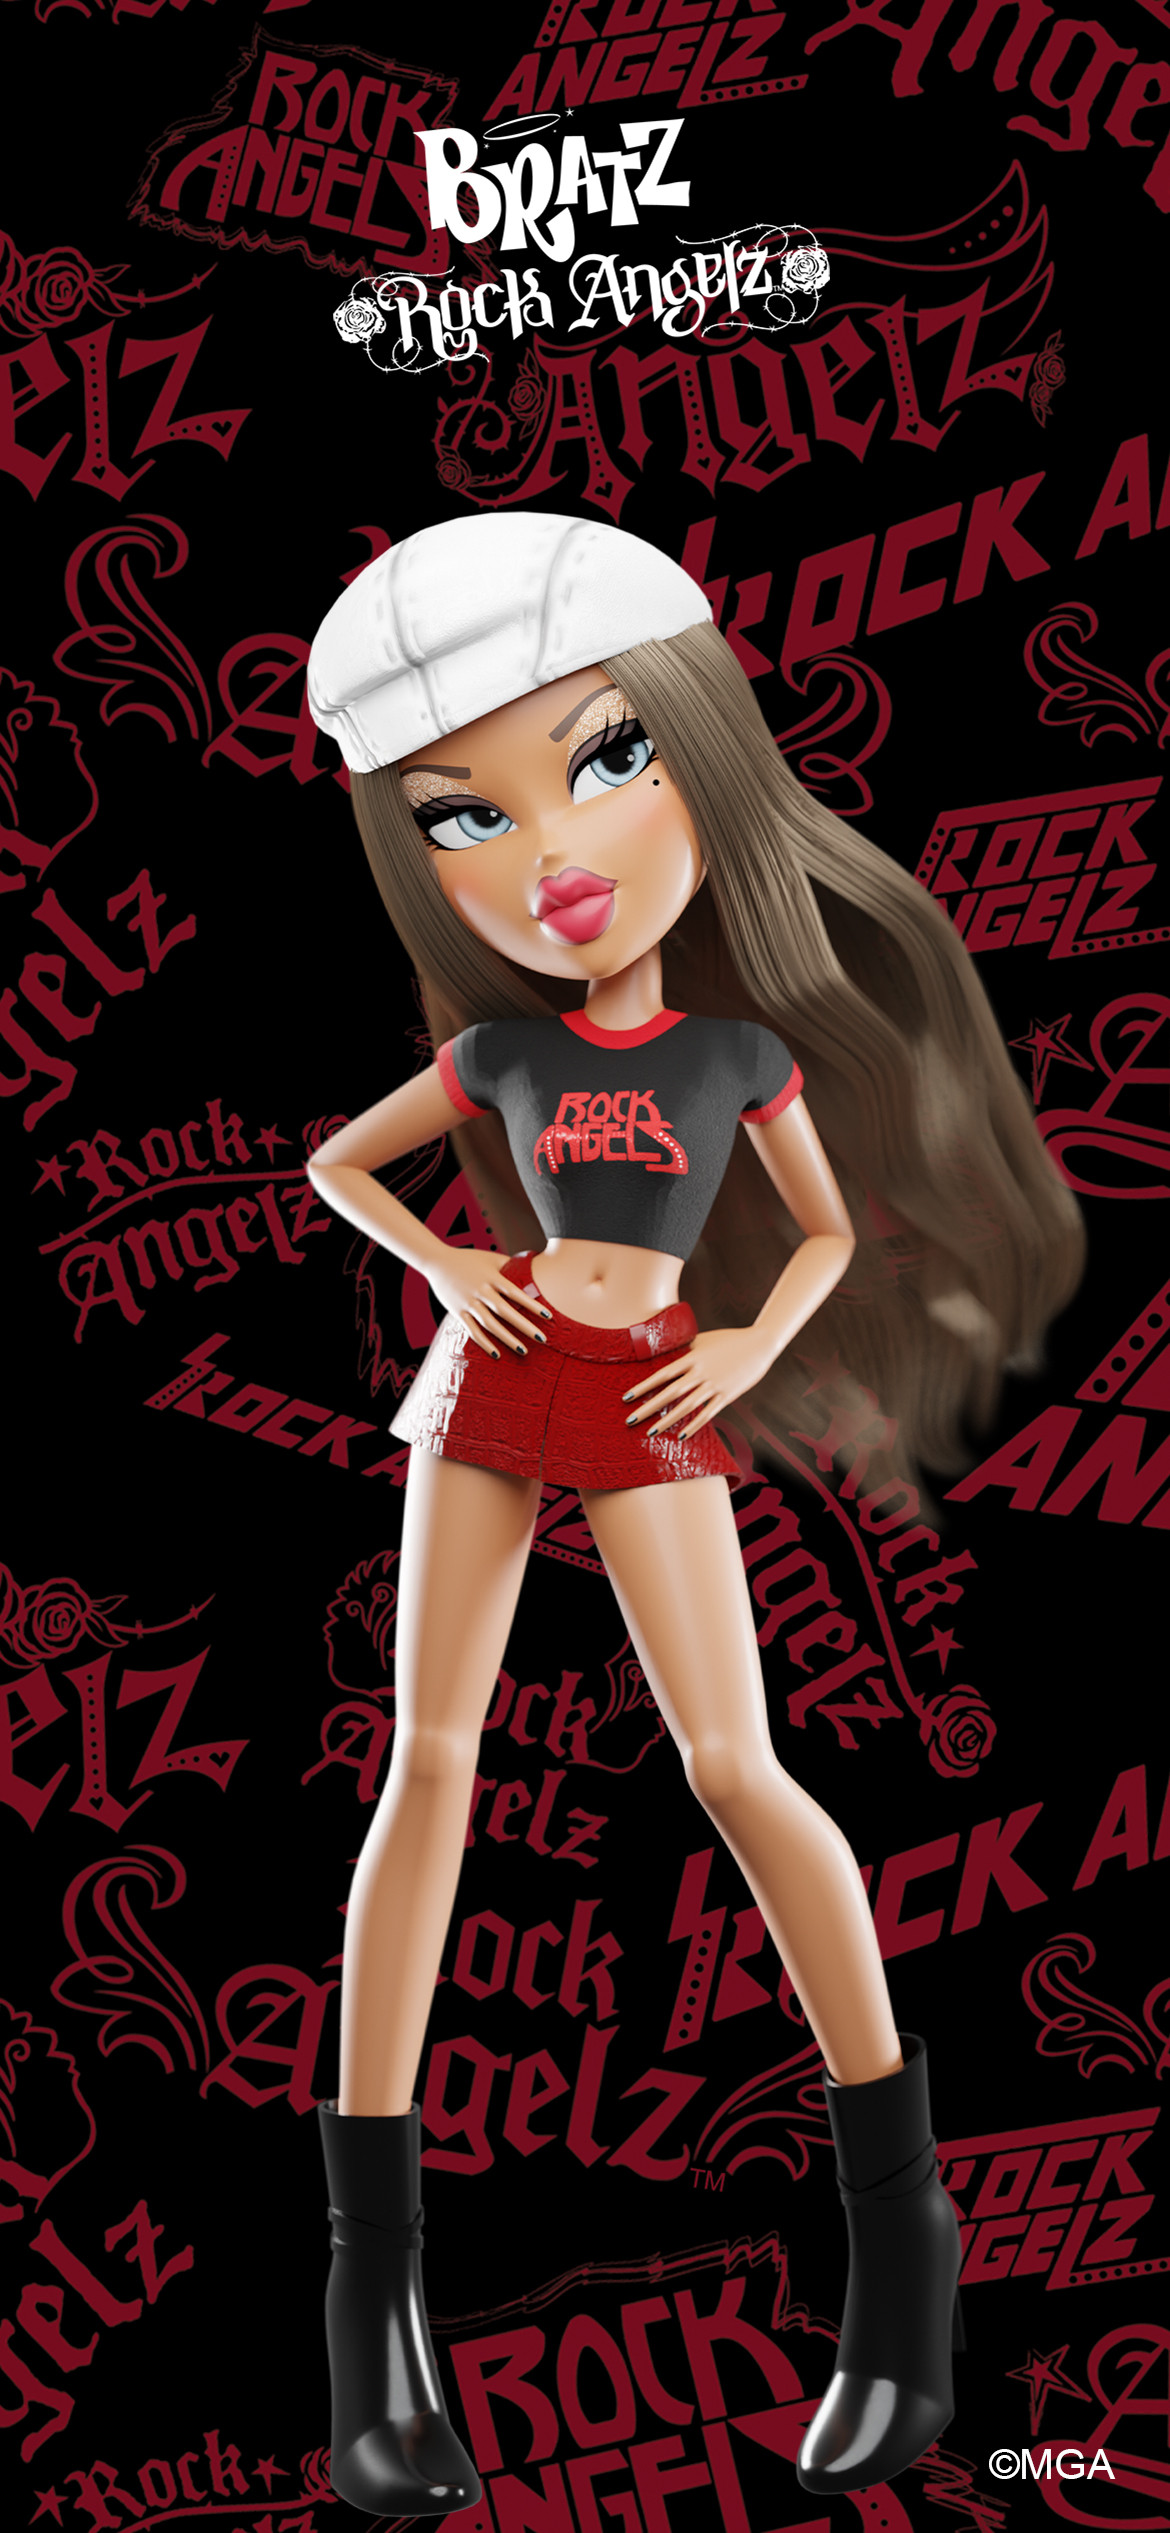 Iphone wallpaper of the Rock Angelz doll from the 2000s - Bratz